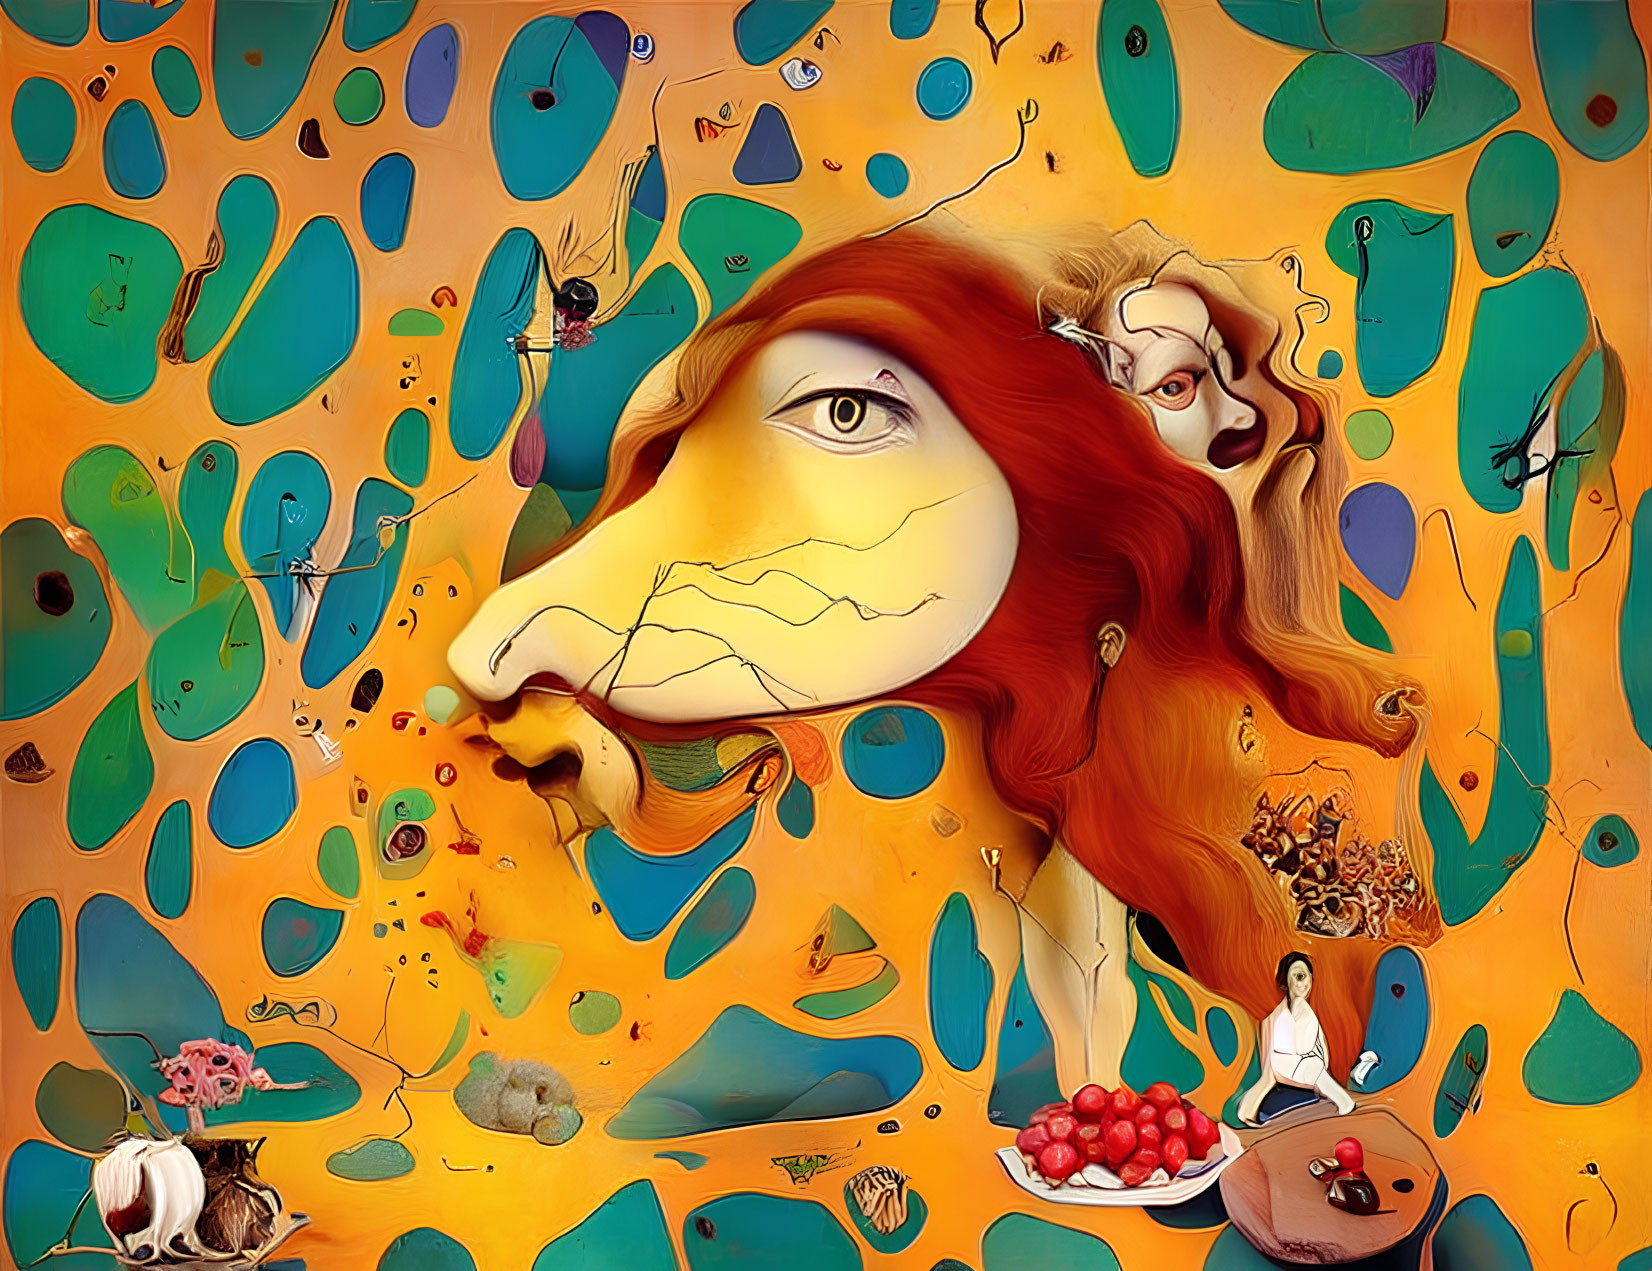 Colorful surrealistic artwork: lion's face with human elements, abstract shapes, and dreamlike figures